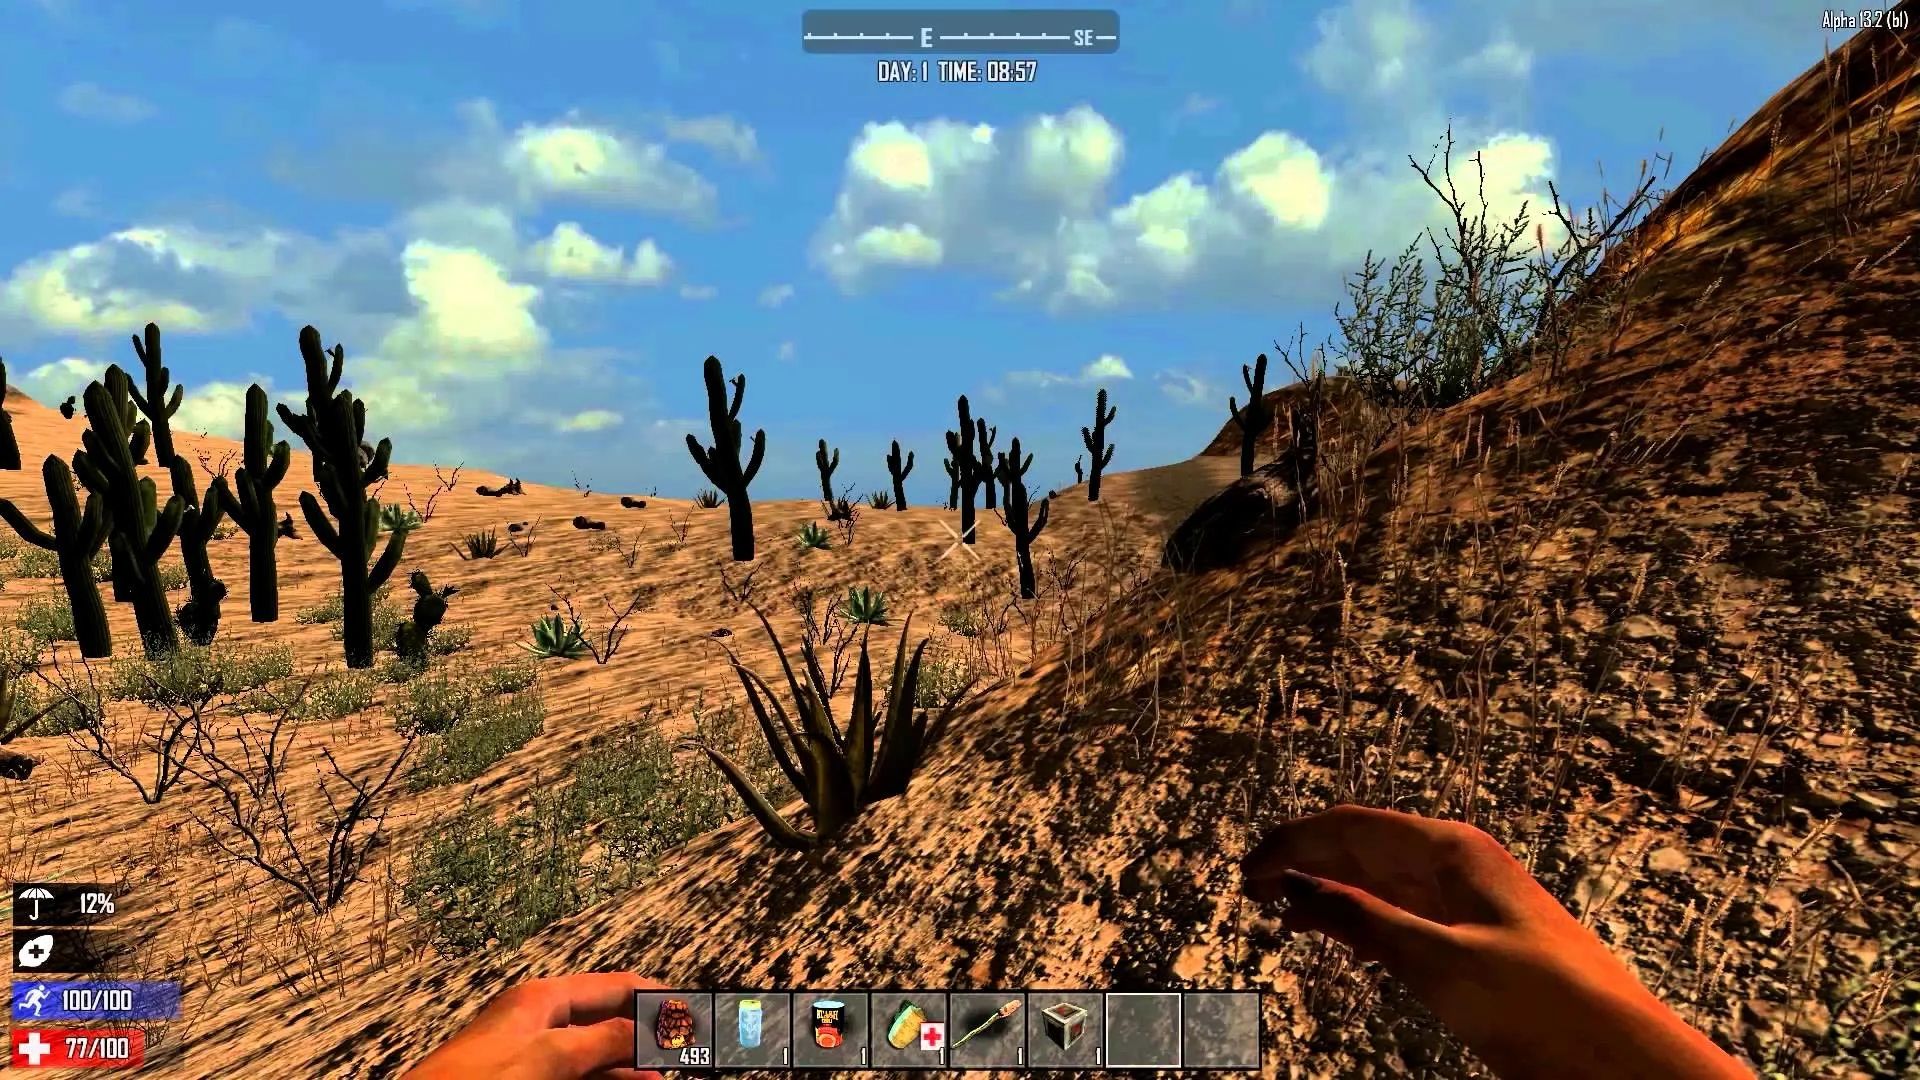 7 day to day похожие. Глина 7 Days to die. 7 Дней игра. Глинистый грунт 7 Days to die.